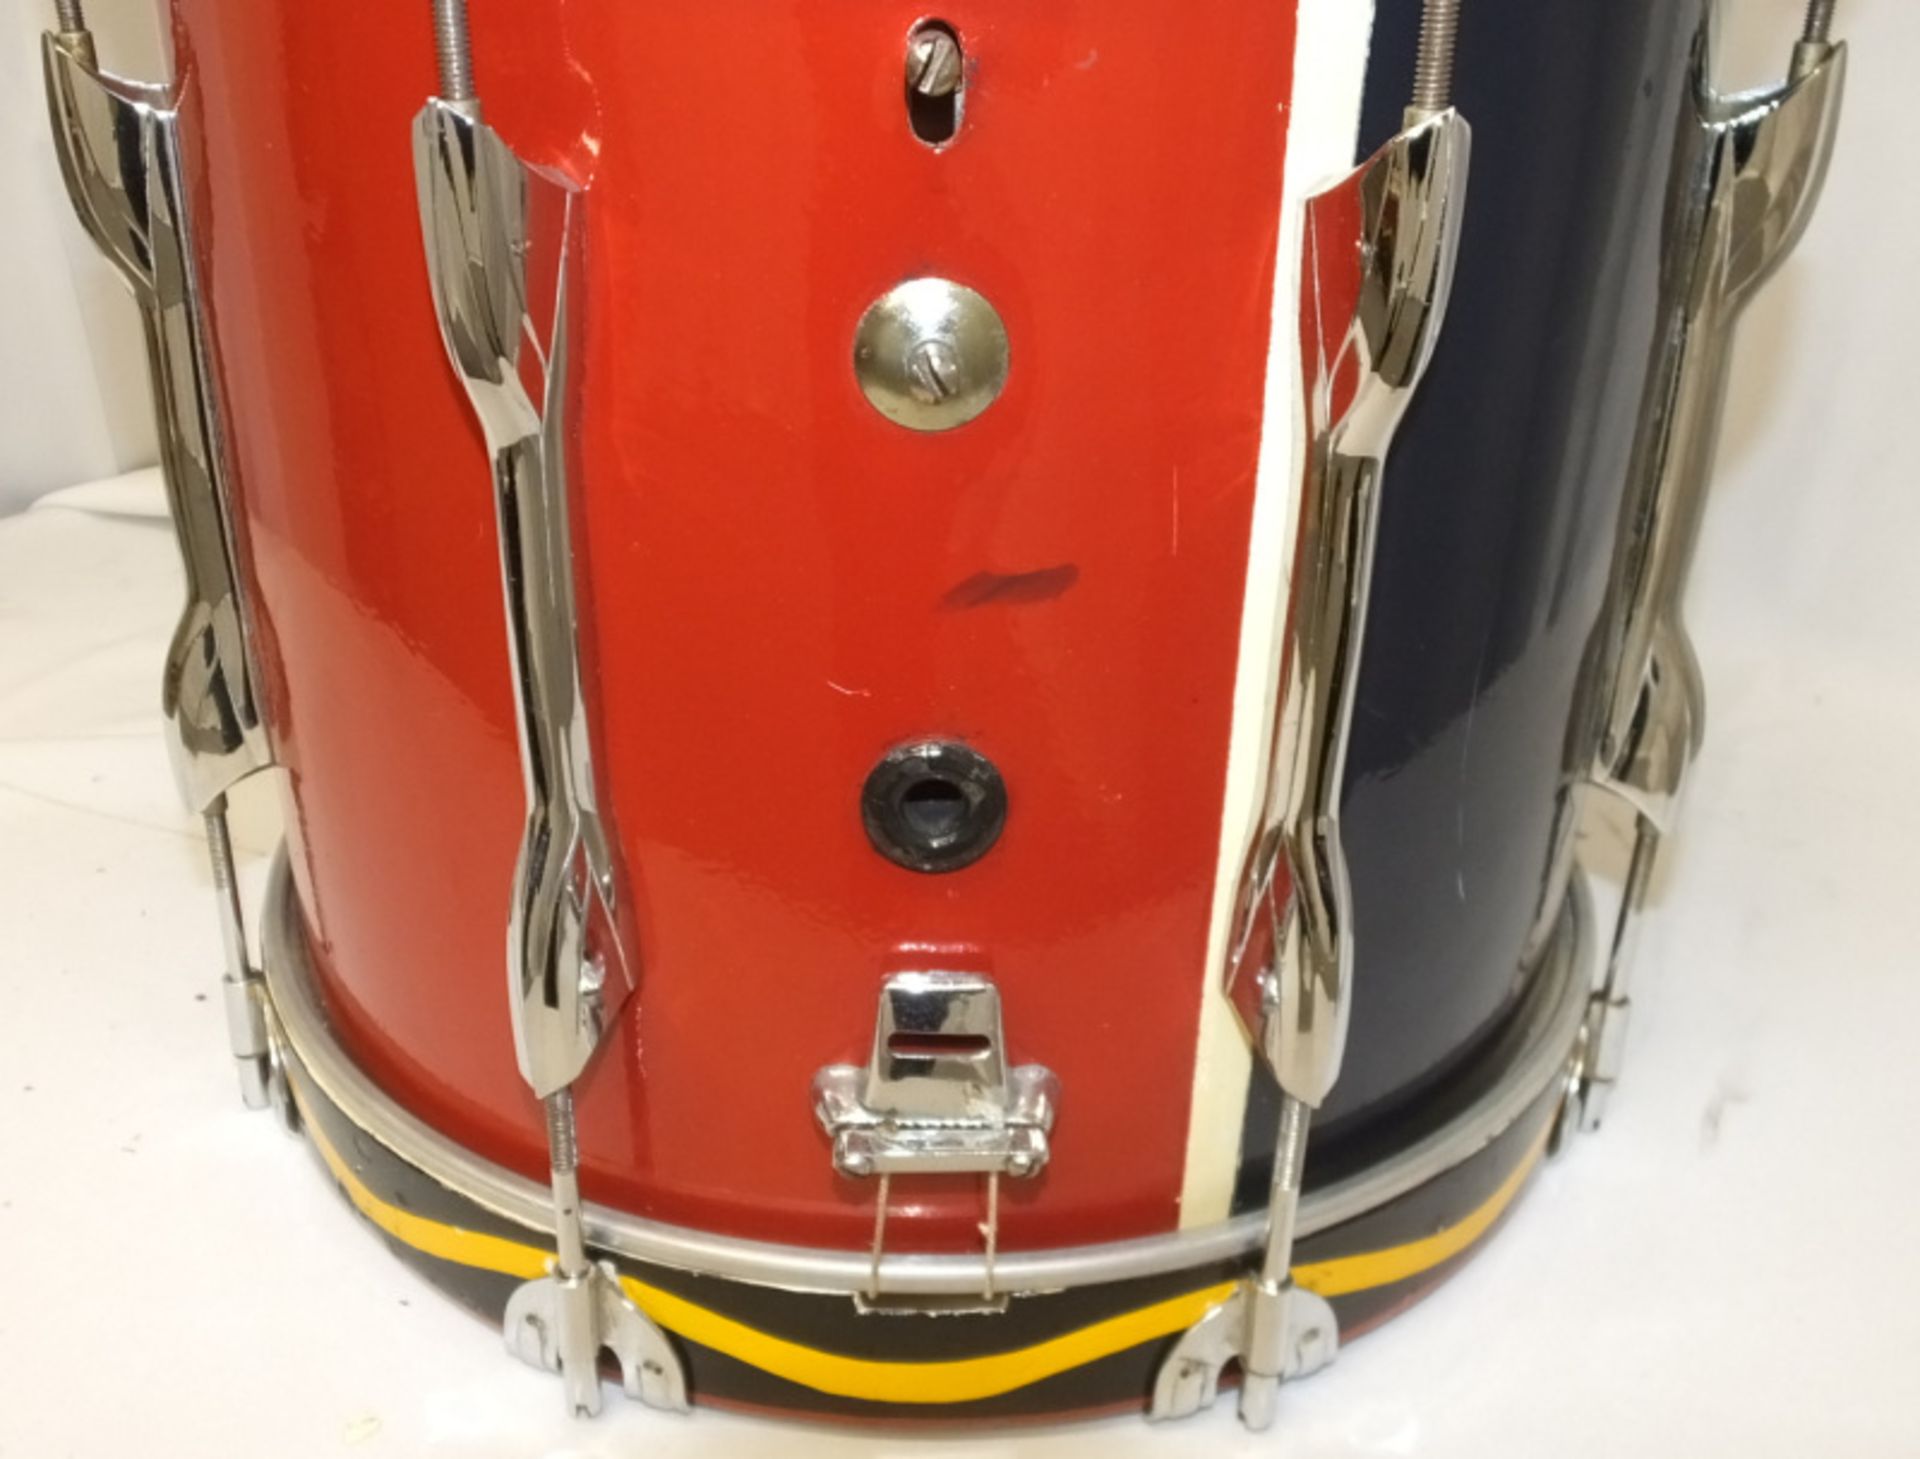 Premier Marching Snare Drum - 14 x 14 inch - Please check photos carefully - Image 7 of 7